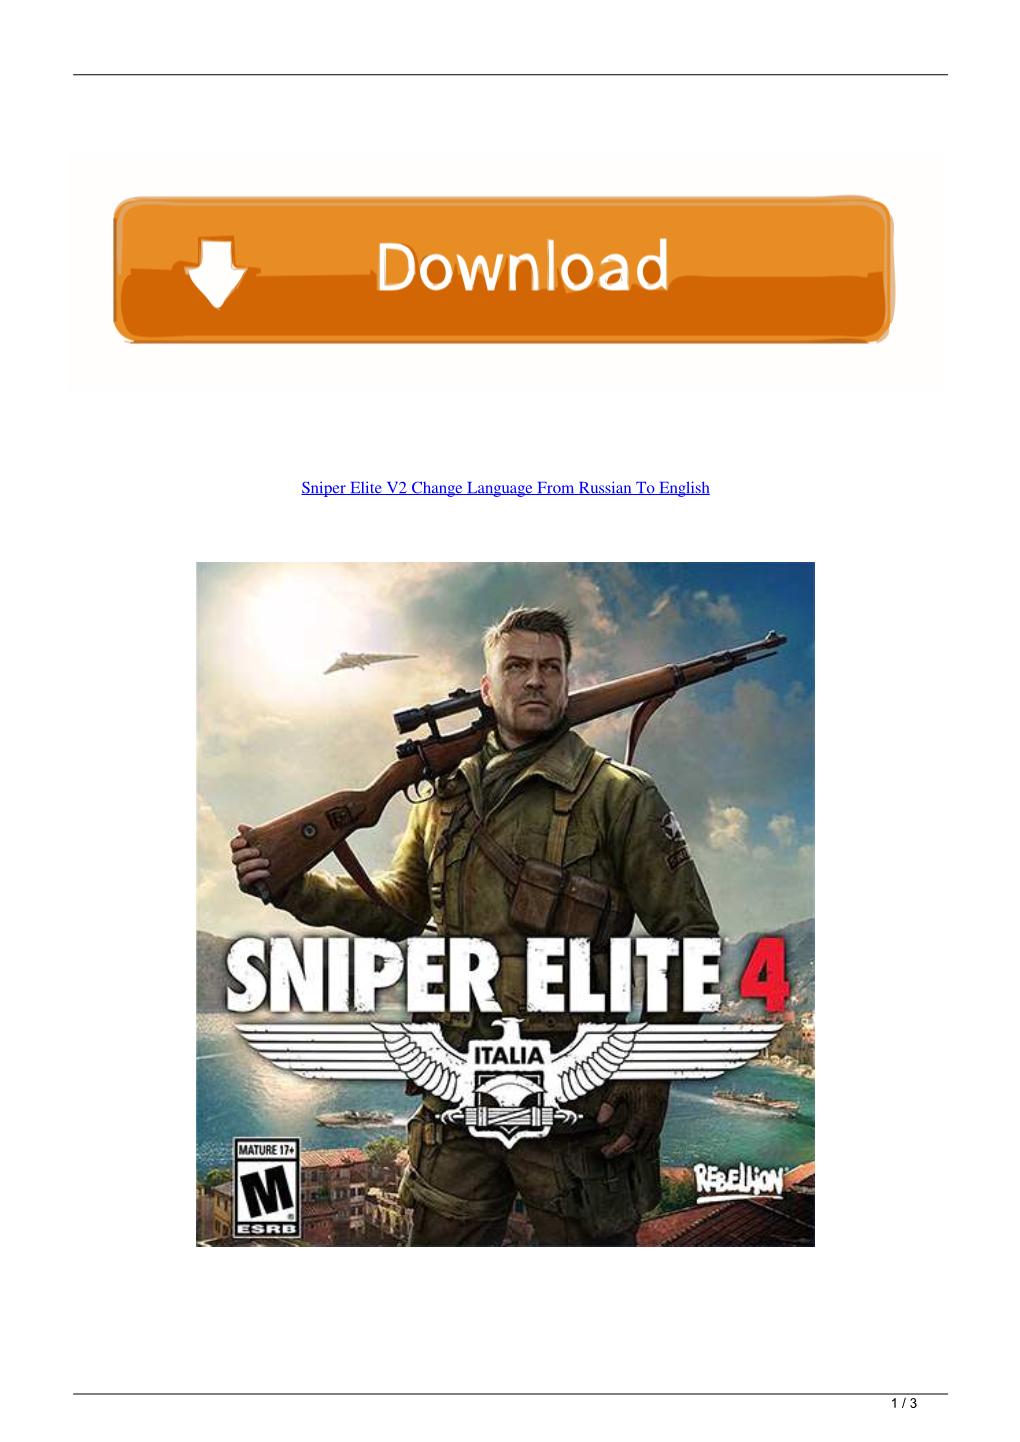 Sniper Elite V2 Change Language from Russian to English